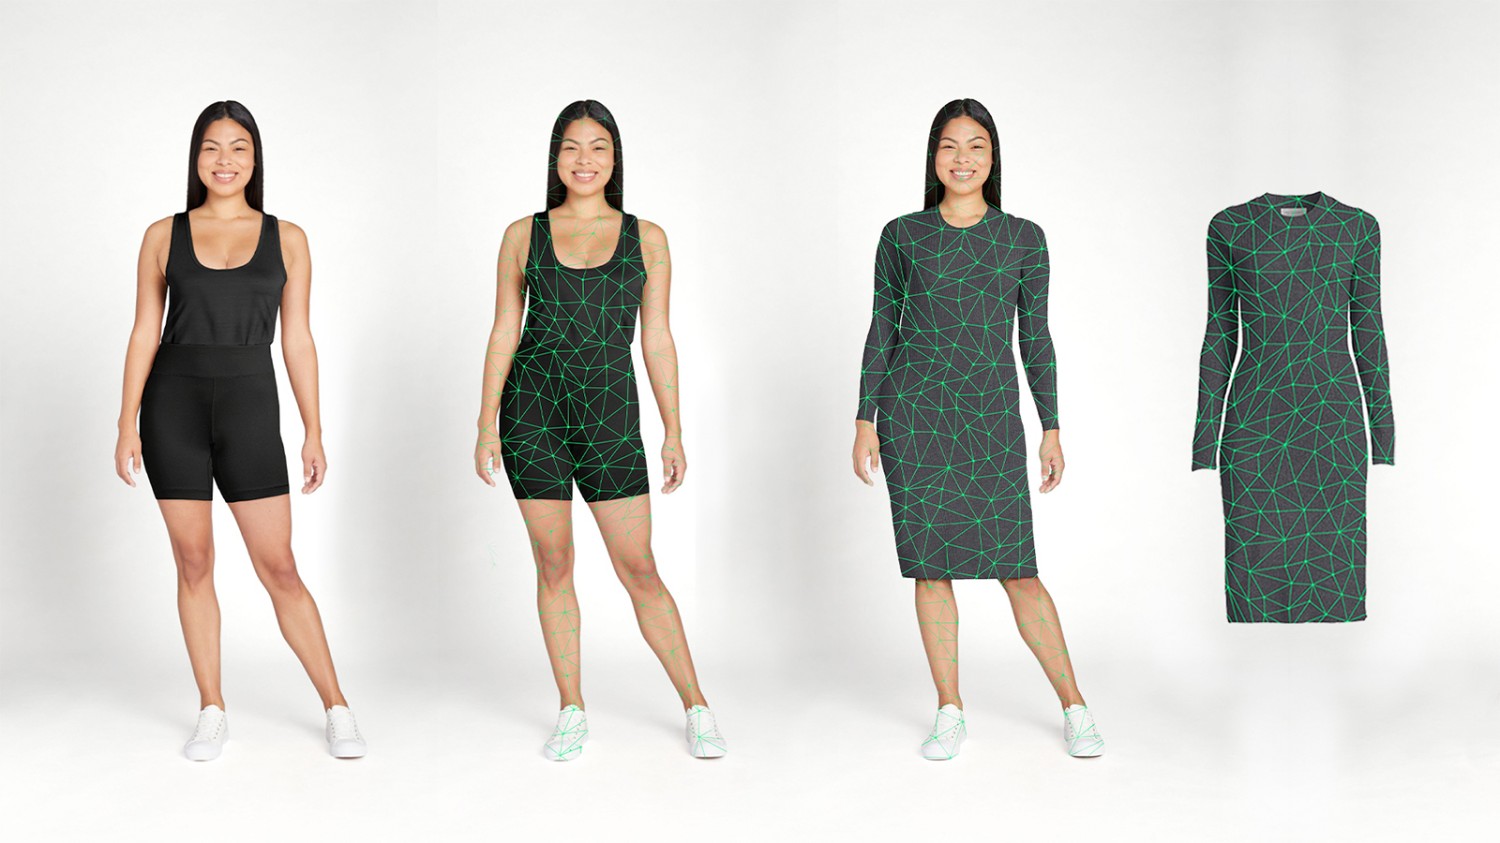 Four side by side images show how the Zeekit Be Your Own Model scans user's body and places the product on their image.